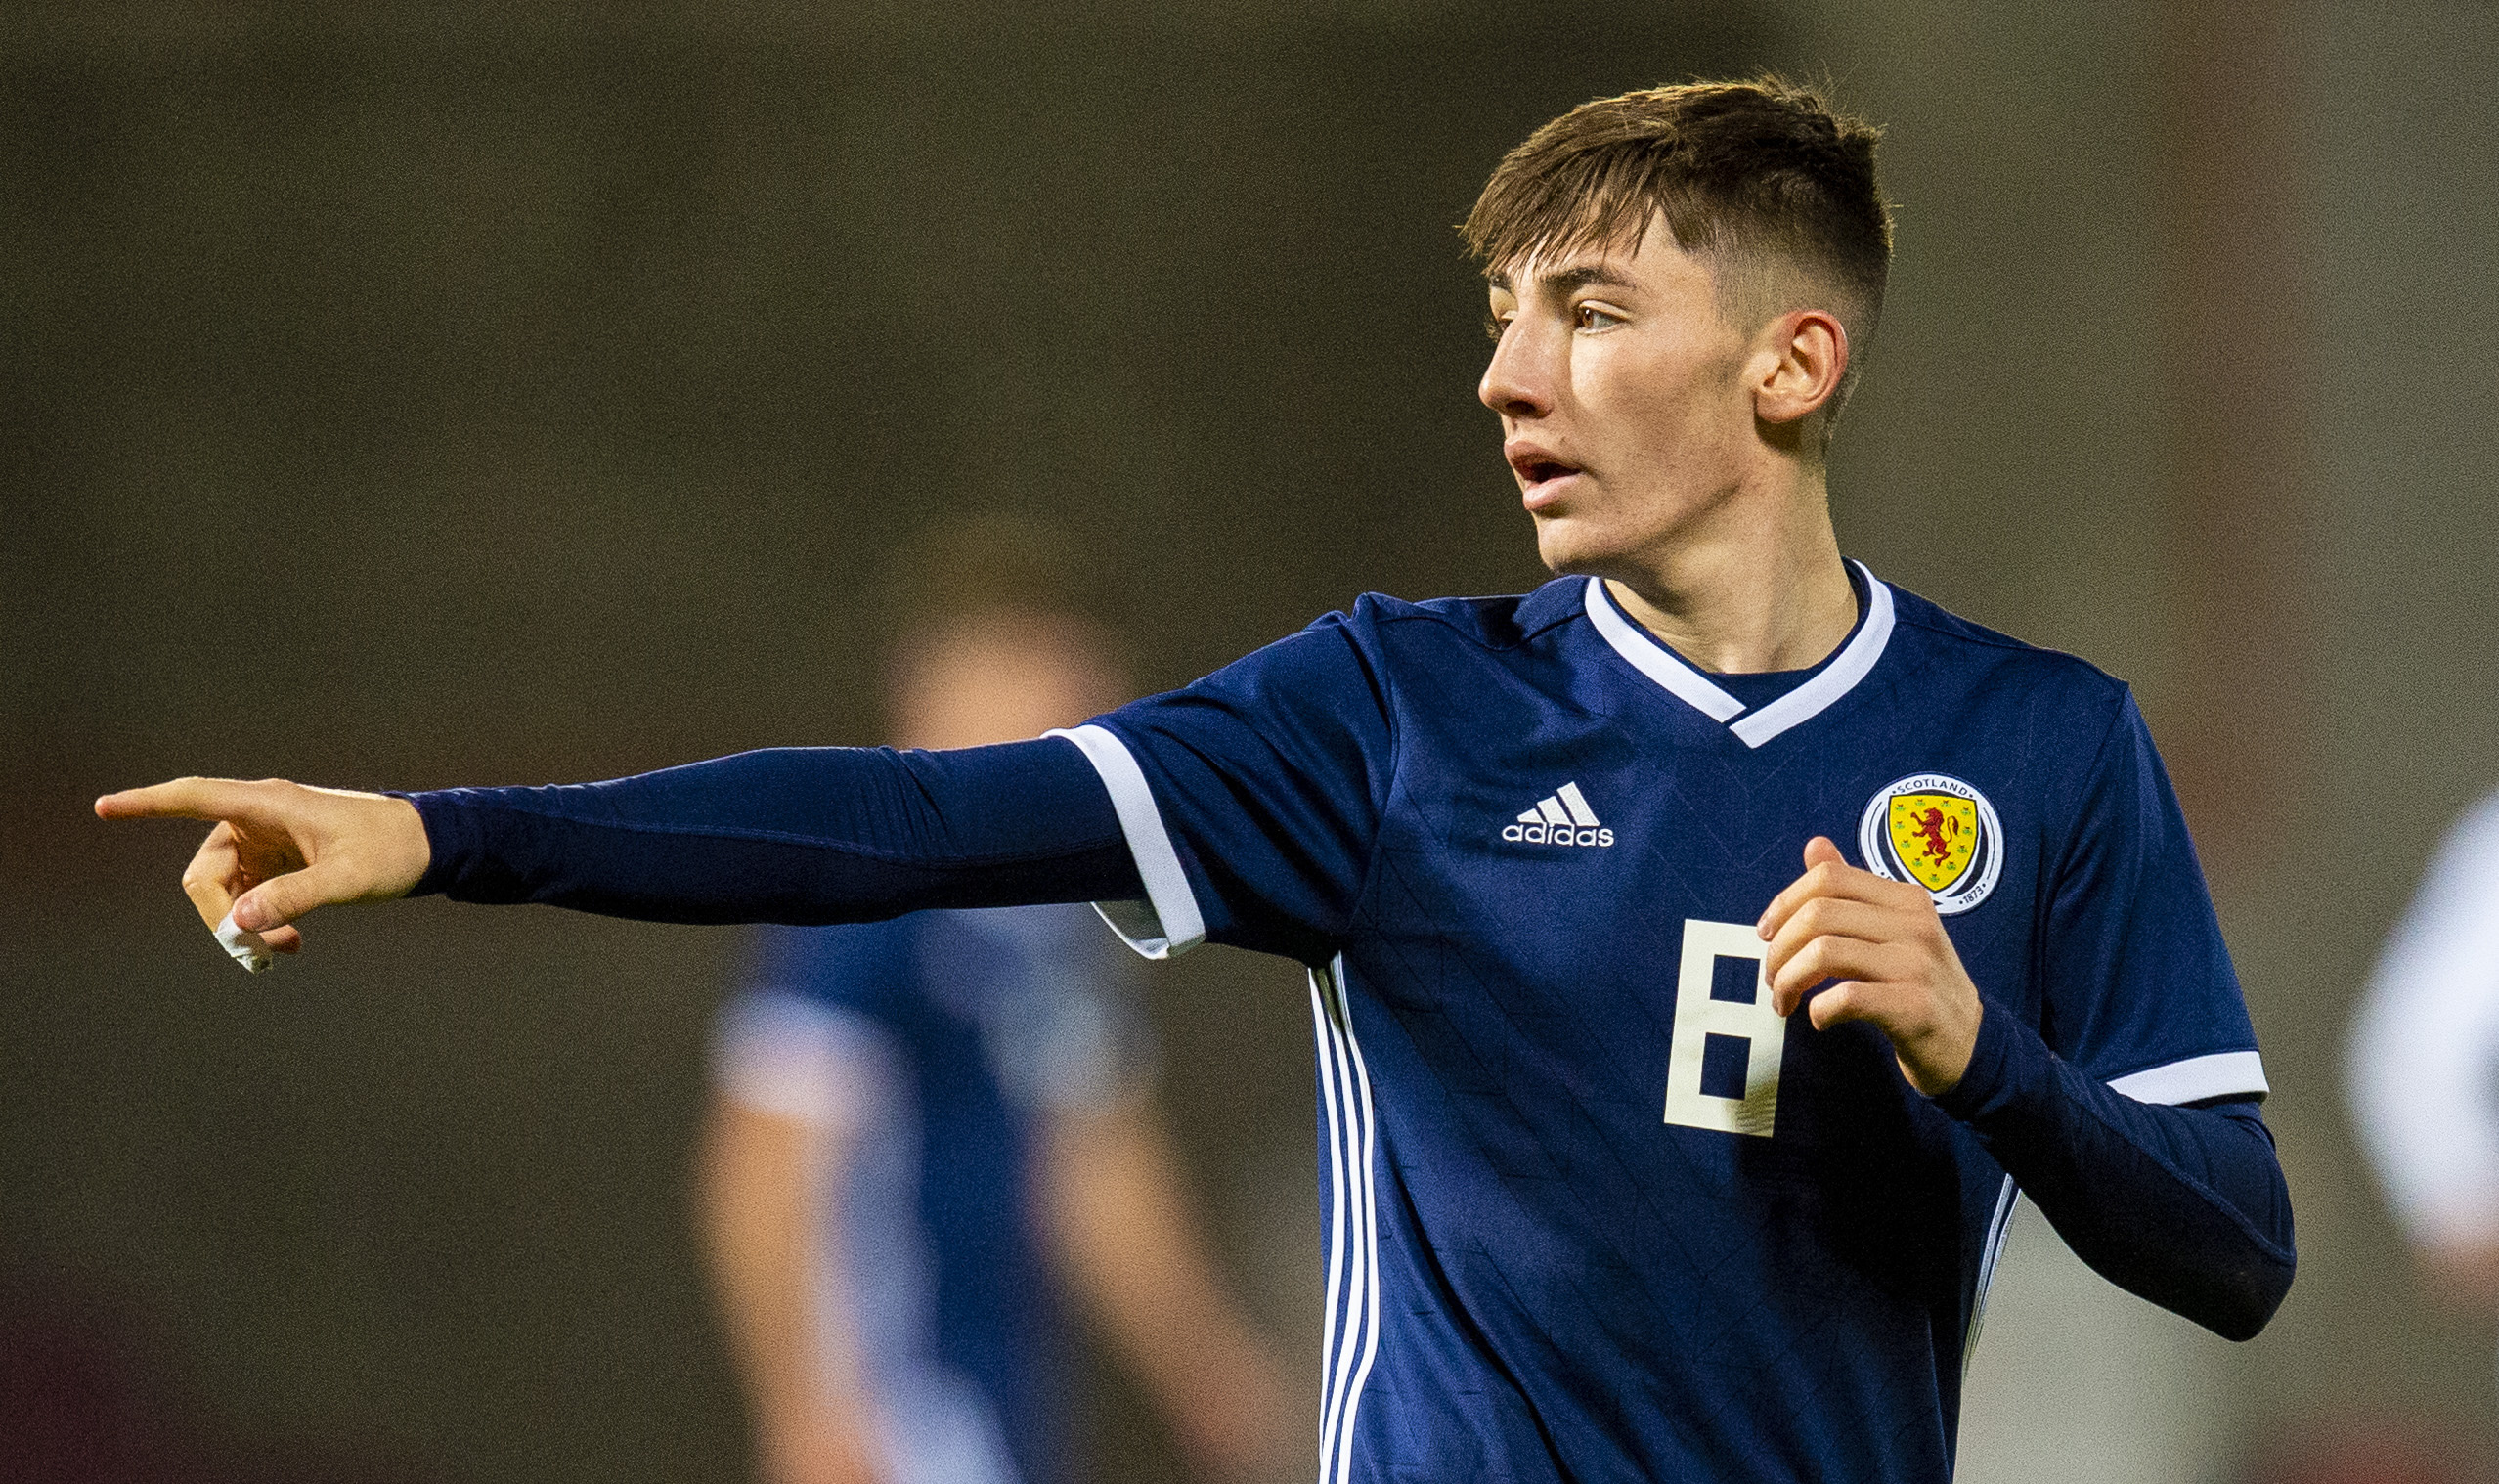 Billy Gilmour could be a surprise inclusion having appeared for Chelsea recently.